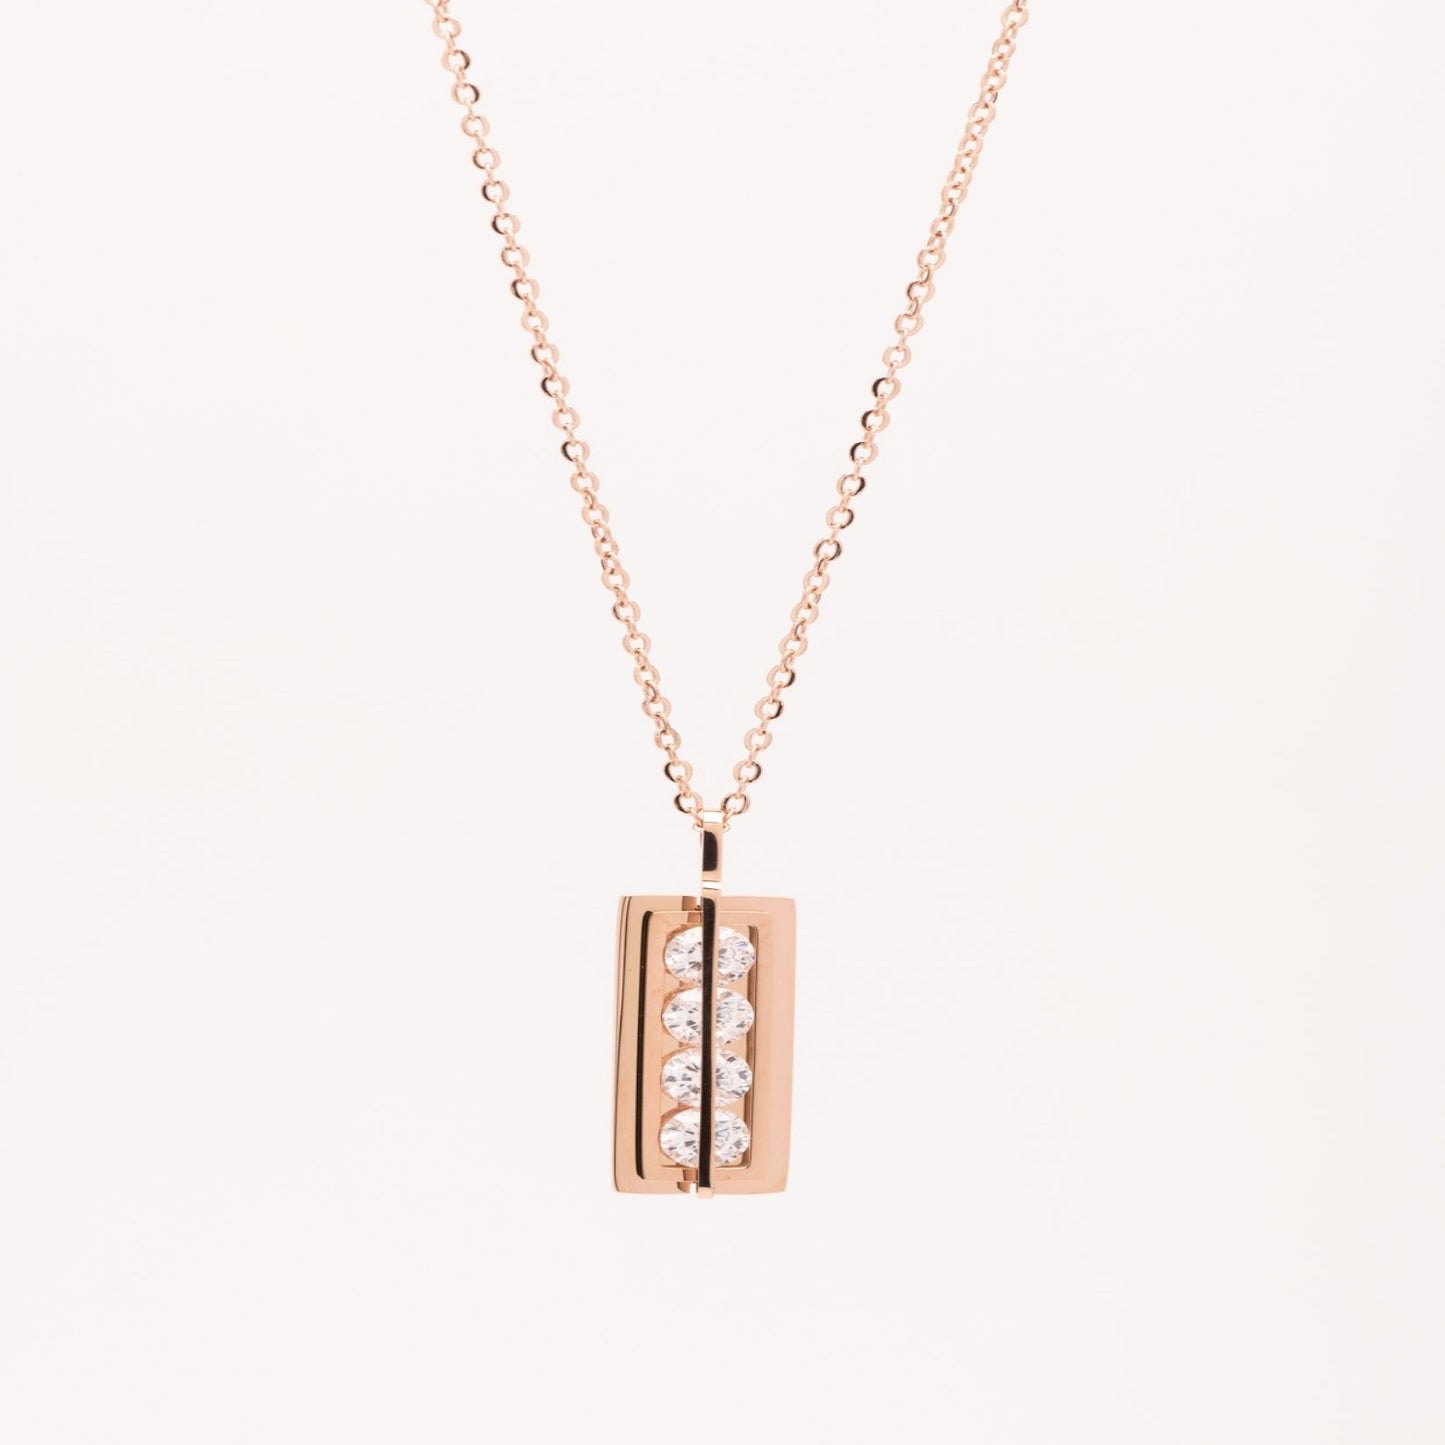 Stainless Steel Rose Gold bar necklace with 4 crystals